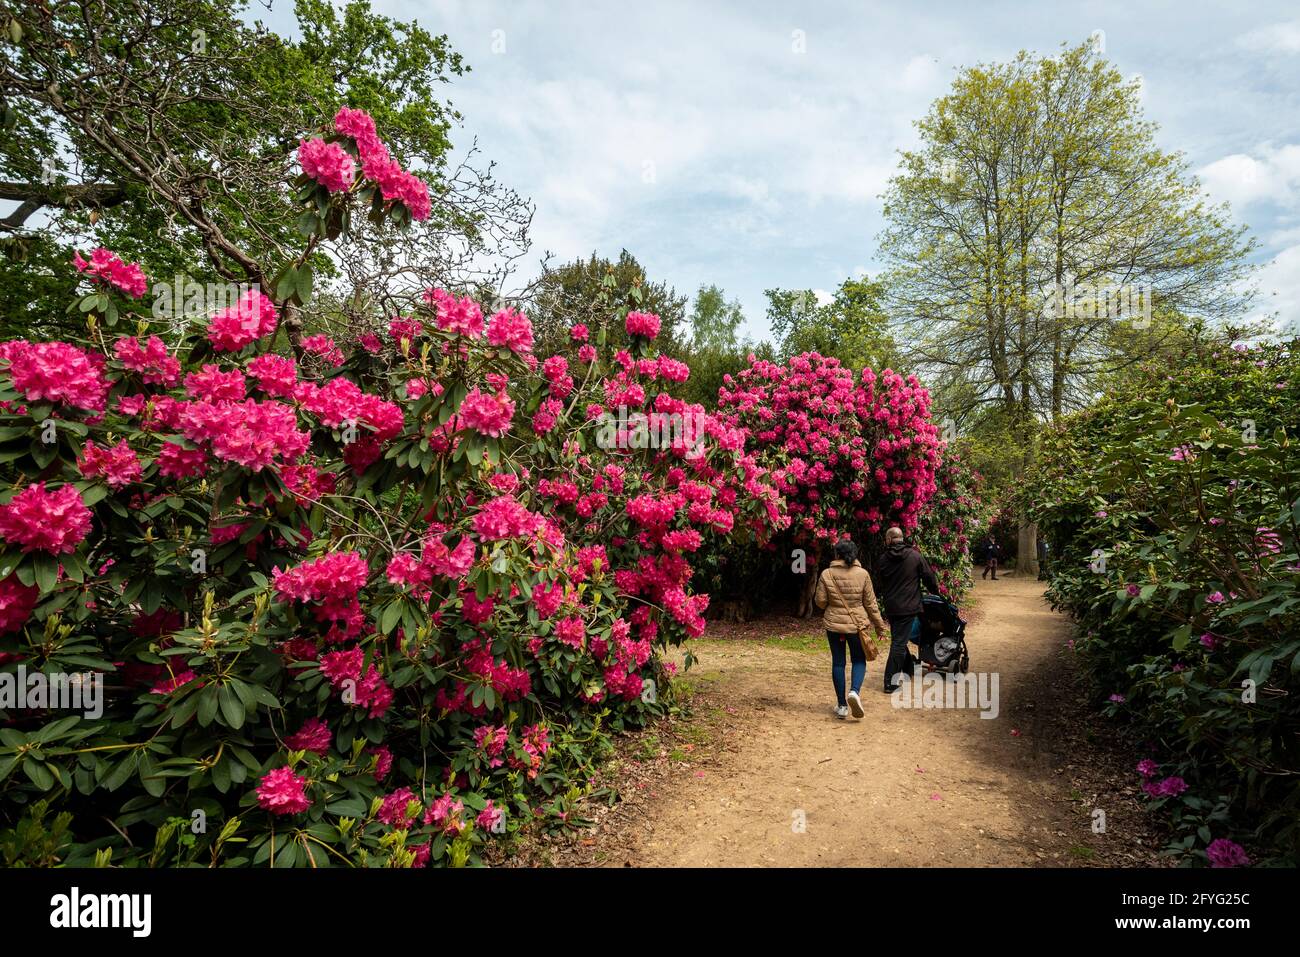 Iver, UK.  28 May 2021. UK Weather: People walk amongst the rhododendrons and azalea, currently in bloom, in the Temple Gardens at Langley Park in Iver, Buckinghamshire ahead of the Bank Holiday weekend, when temperatures are expected to rise above 20C.  Langley Park is a former royal hunting ground with links back to King Henry VIII, Queen Elizabeth I and Queen Victoria.   Credit: Stephen Chung / Alamy Live News Stock Photo